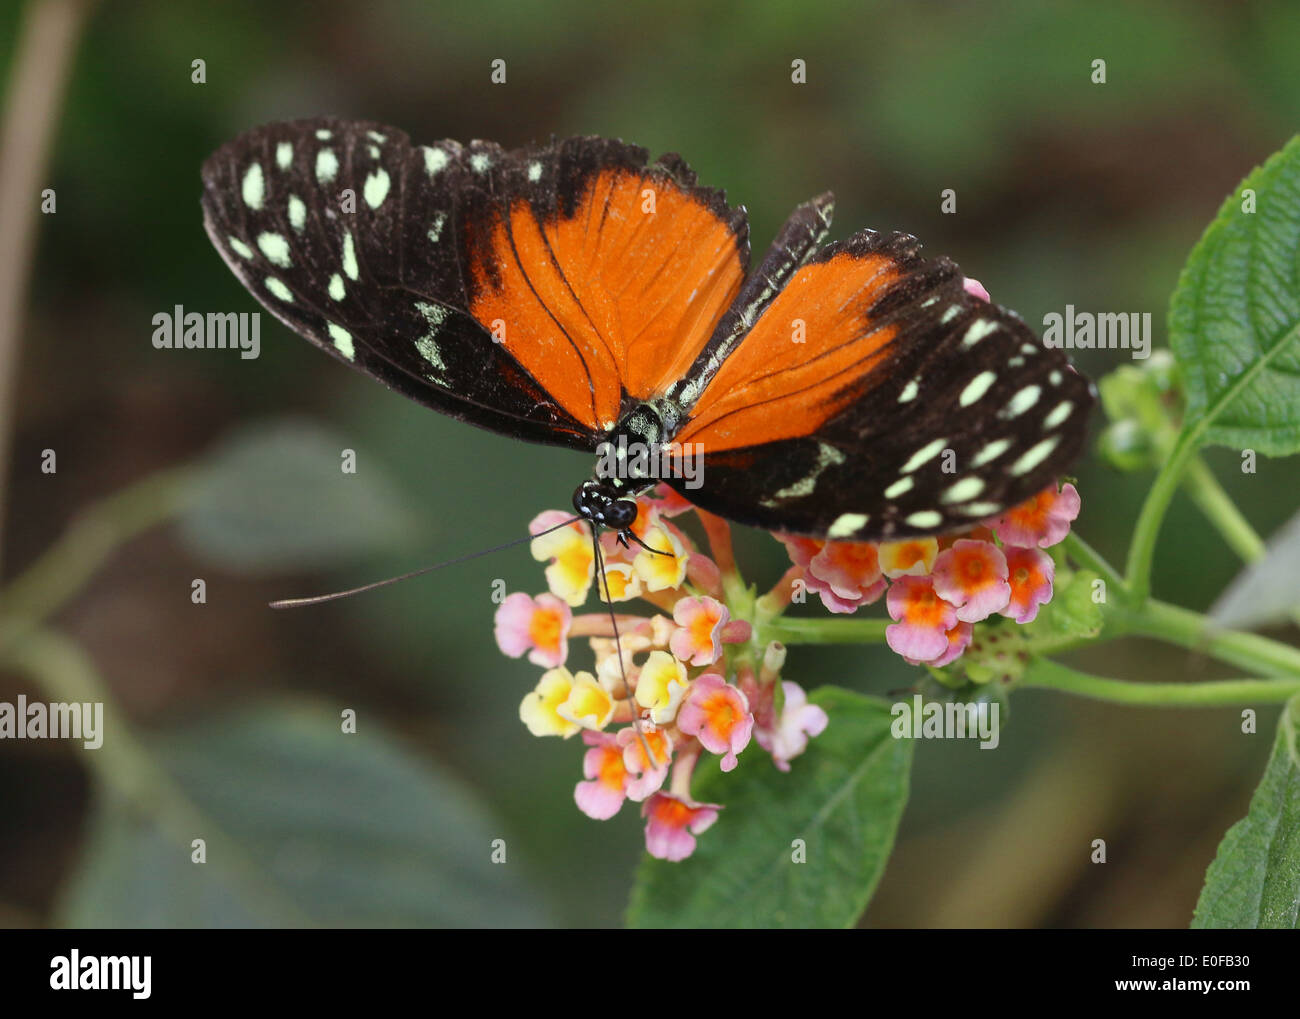 Tiger Longwing, Hecale Longwing or Golden Longwing butterfly (Heliconius Hecale) feeding on a tropical flower Stock Photo